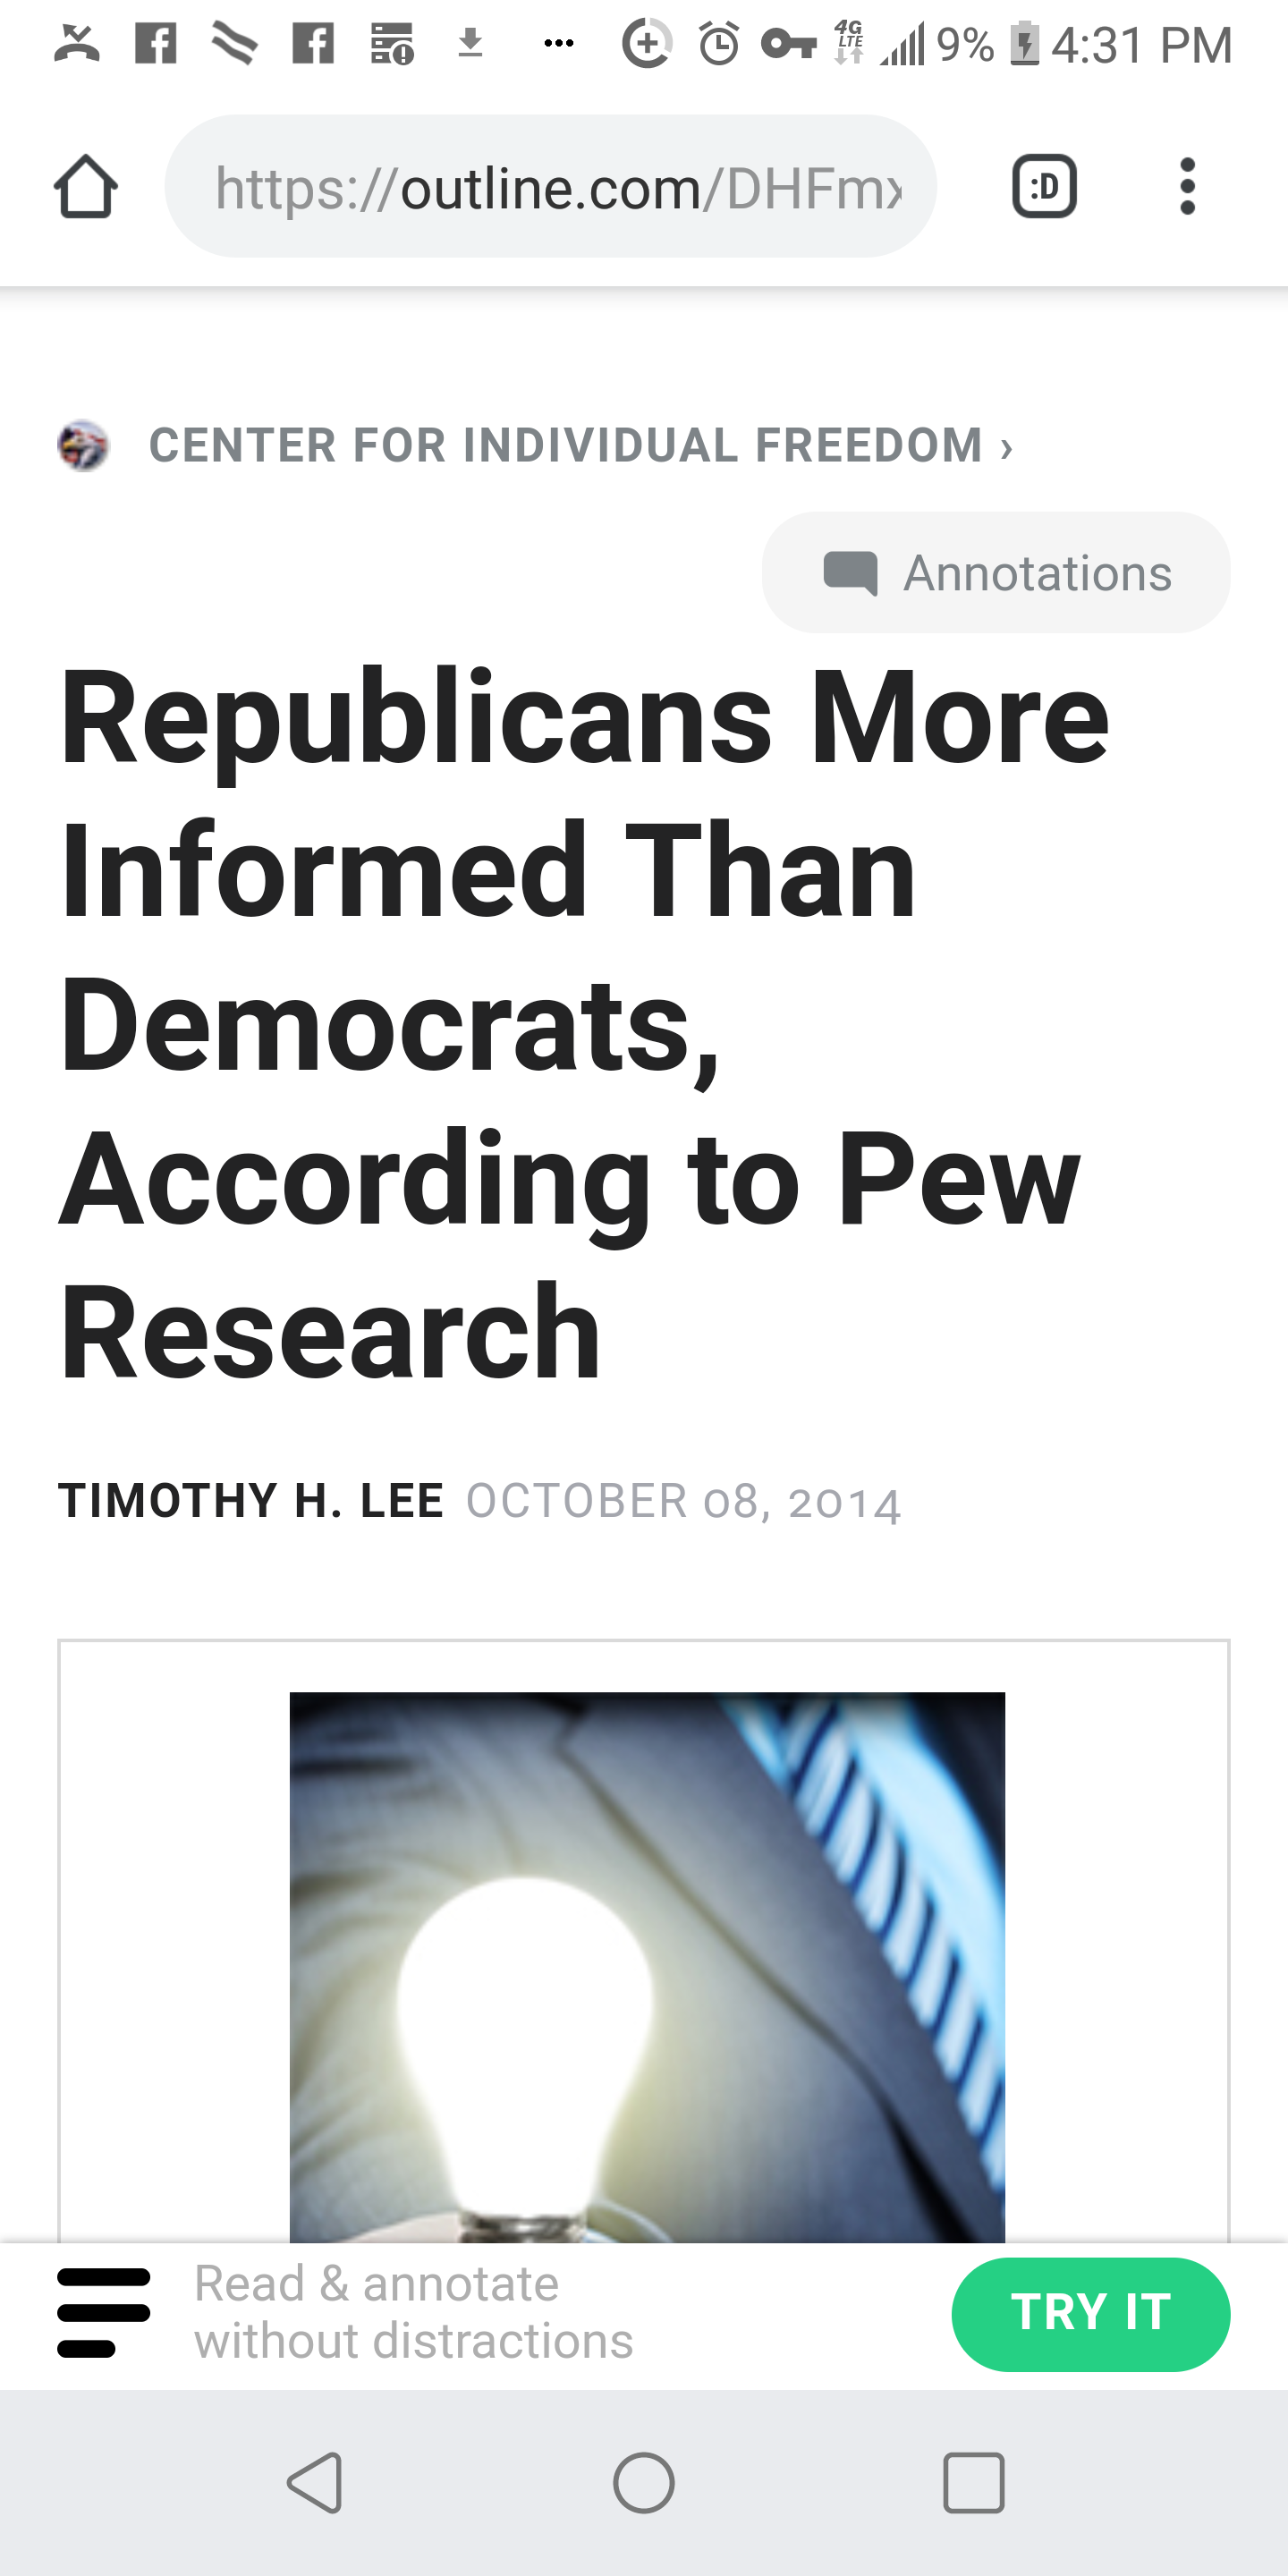 TERRIFYING: Study finds liberals are basically unreachable.